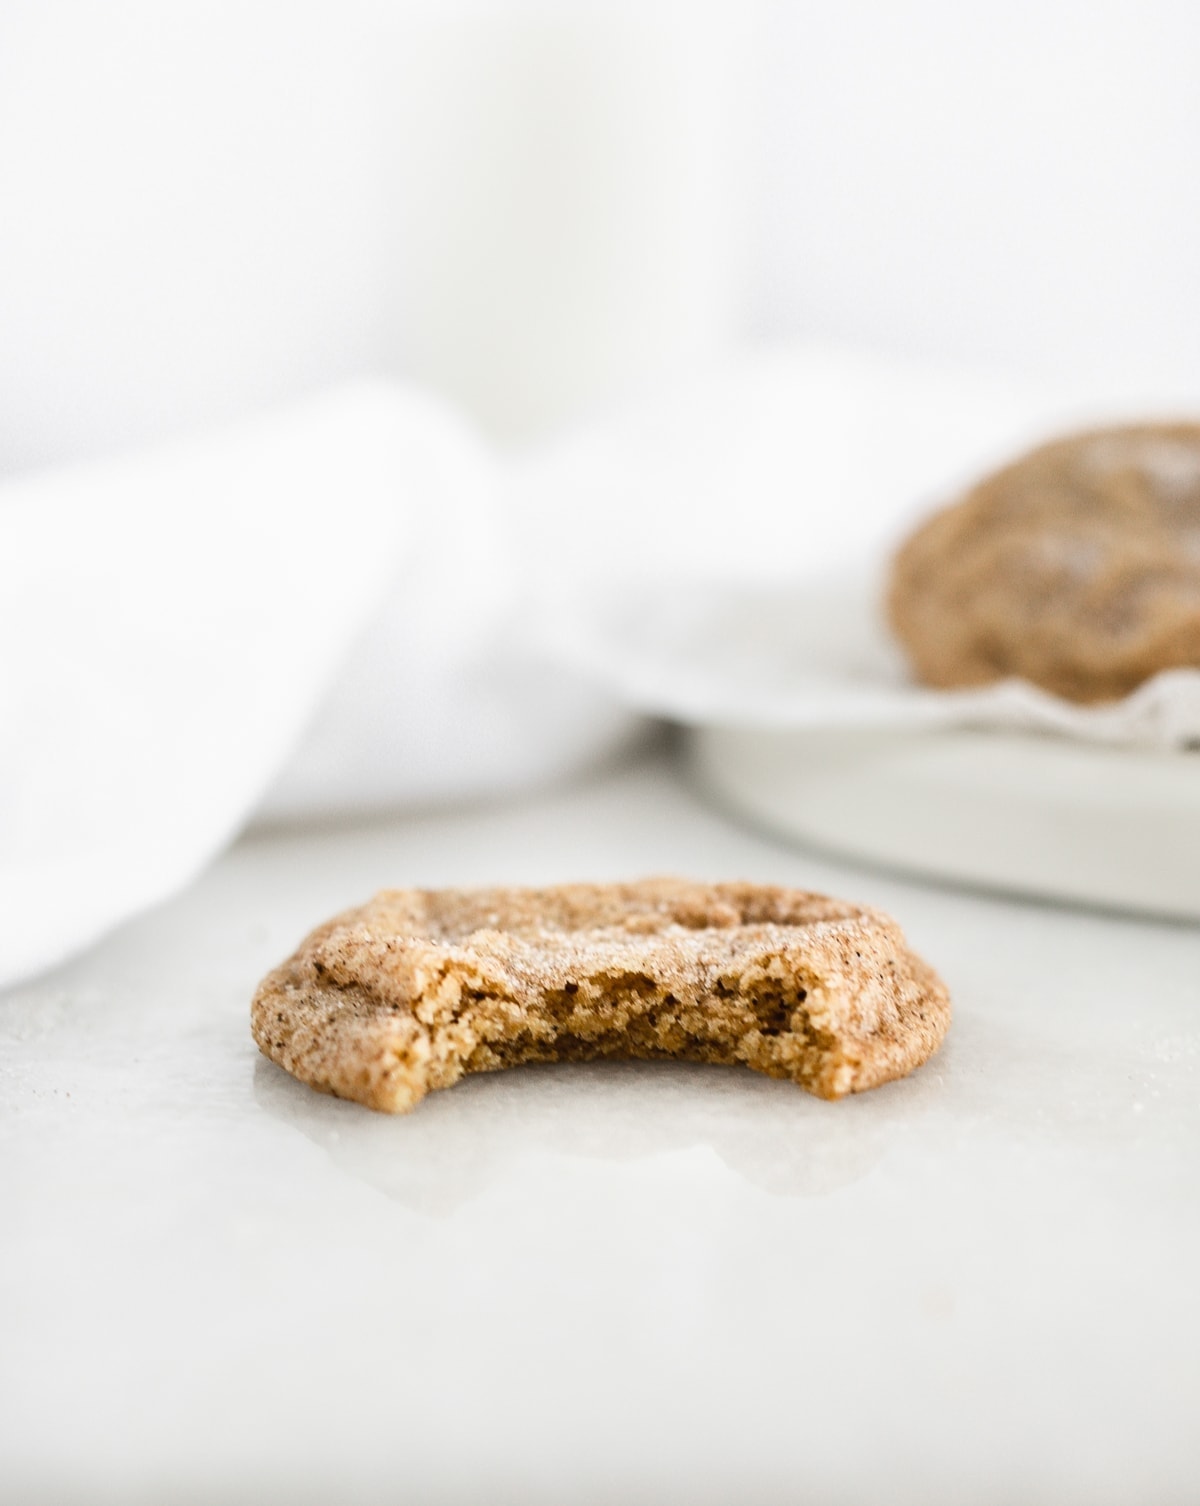 Chai Spiced Snickerdoodles have soft and buttery insides and sweet and spicy, slightly crunchy outsides. The perfect cookies for pairing with a cup of tea. (vegetarian, dairy-free option) via livelytable.com